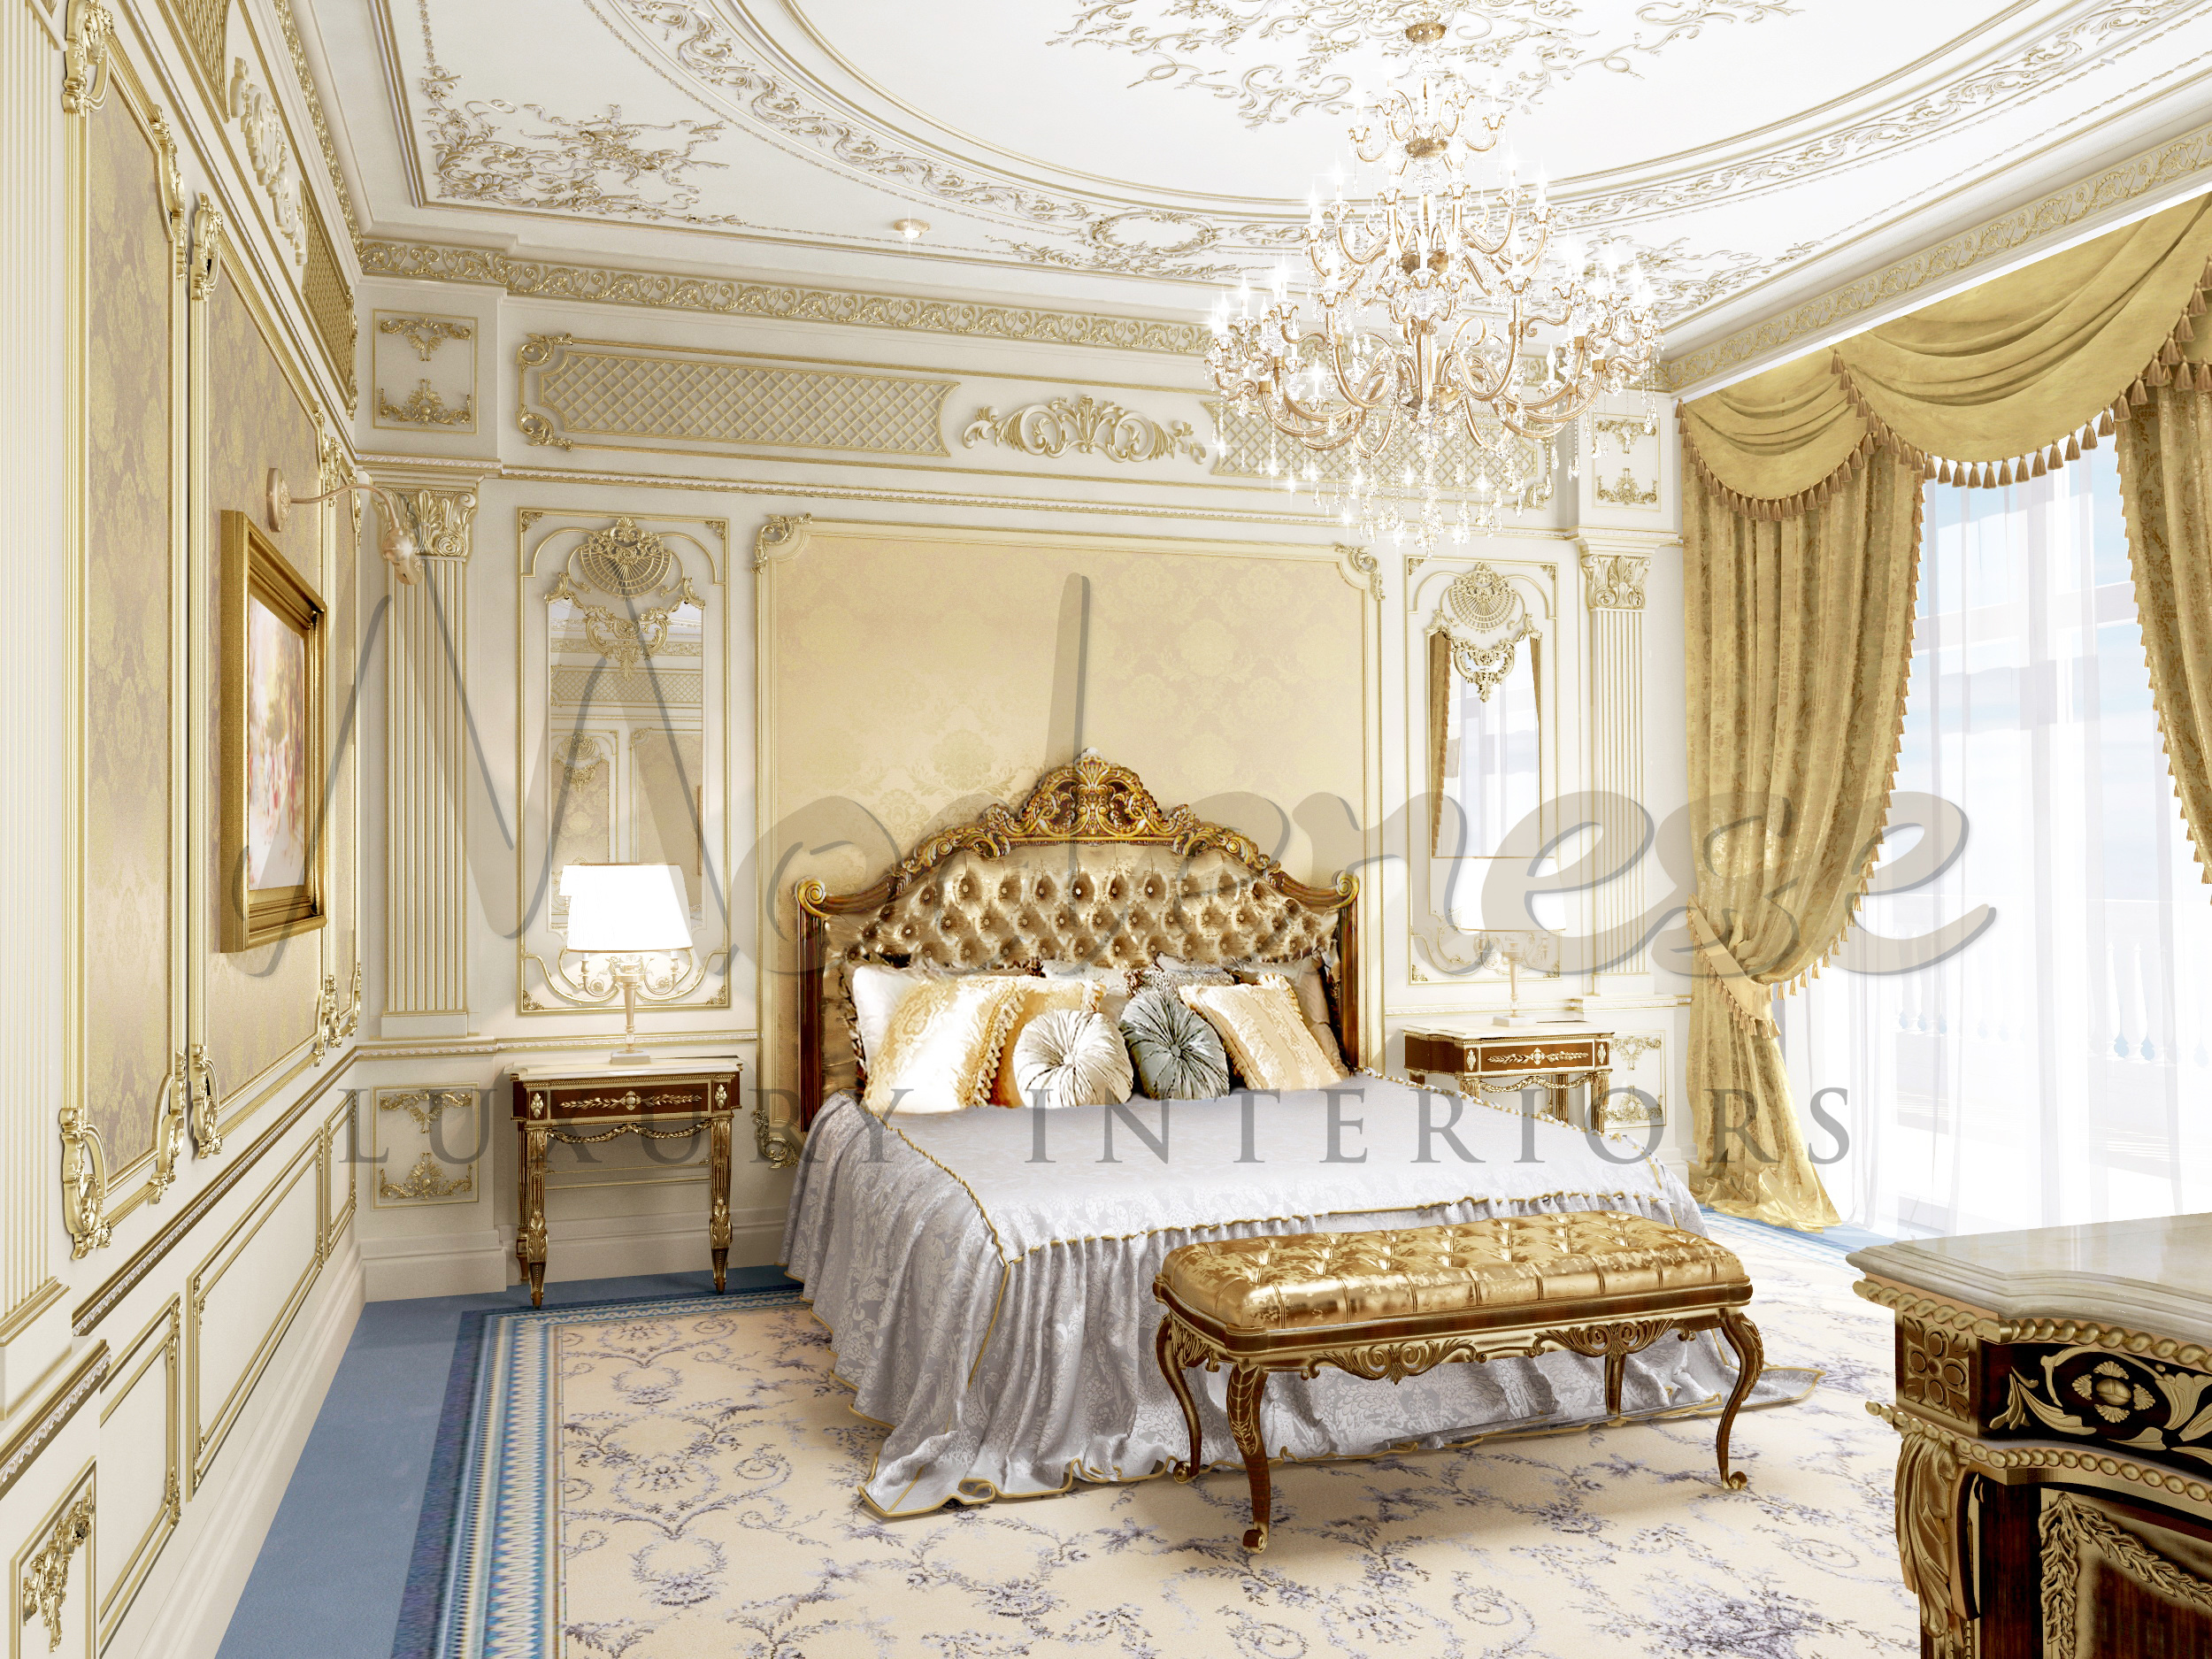 The elegant and luxurious classical bedroom showcases refined upholsteries, luxurious chandelier, and majestic canopy bed.